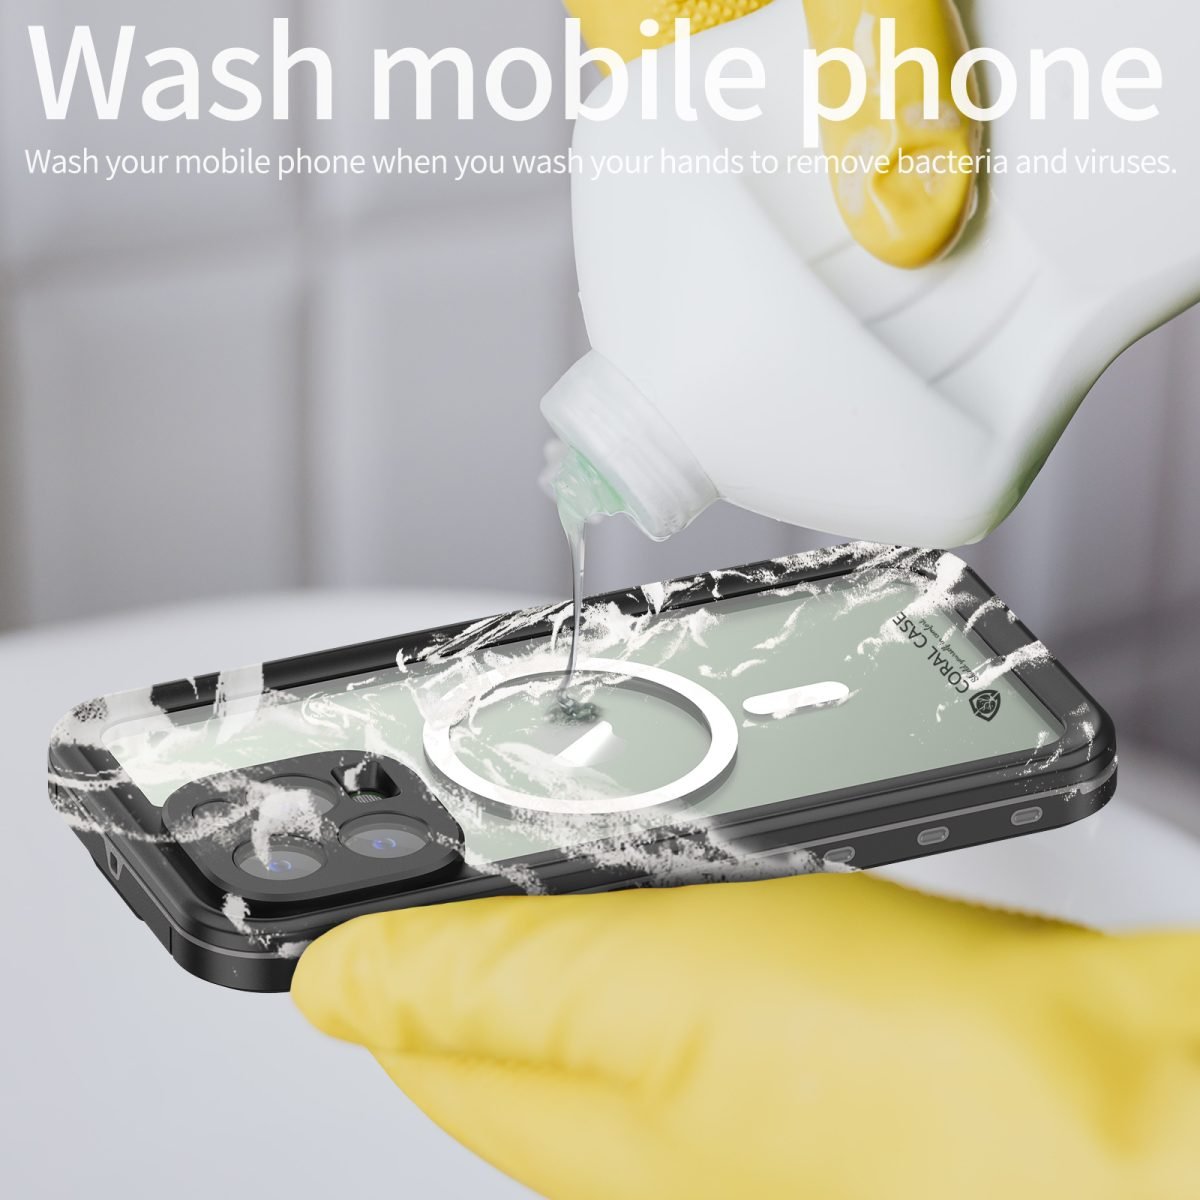 iPhone 14 Pro Max Waterproof Case by Coral Case